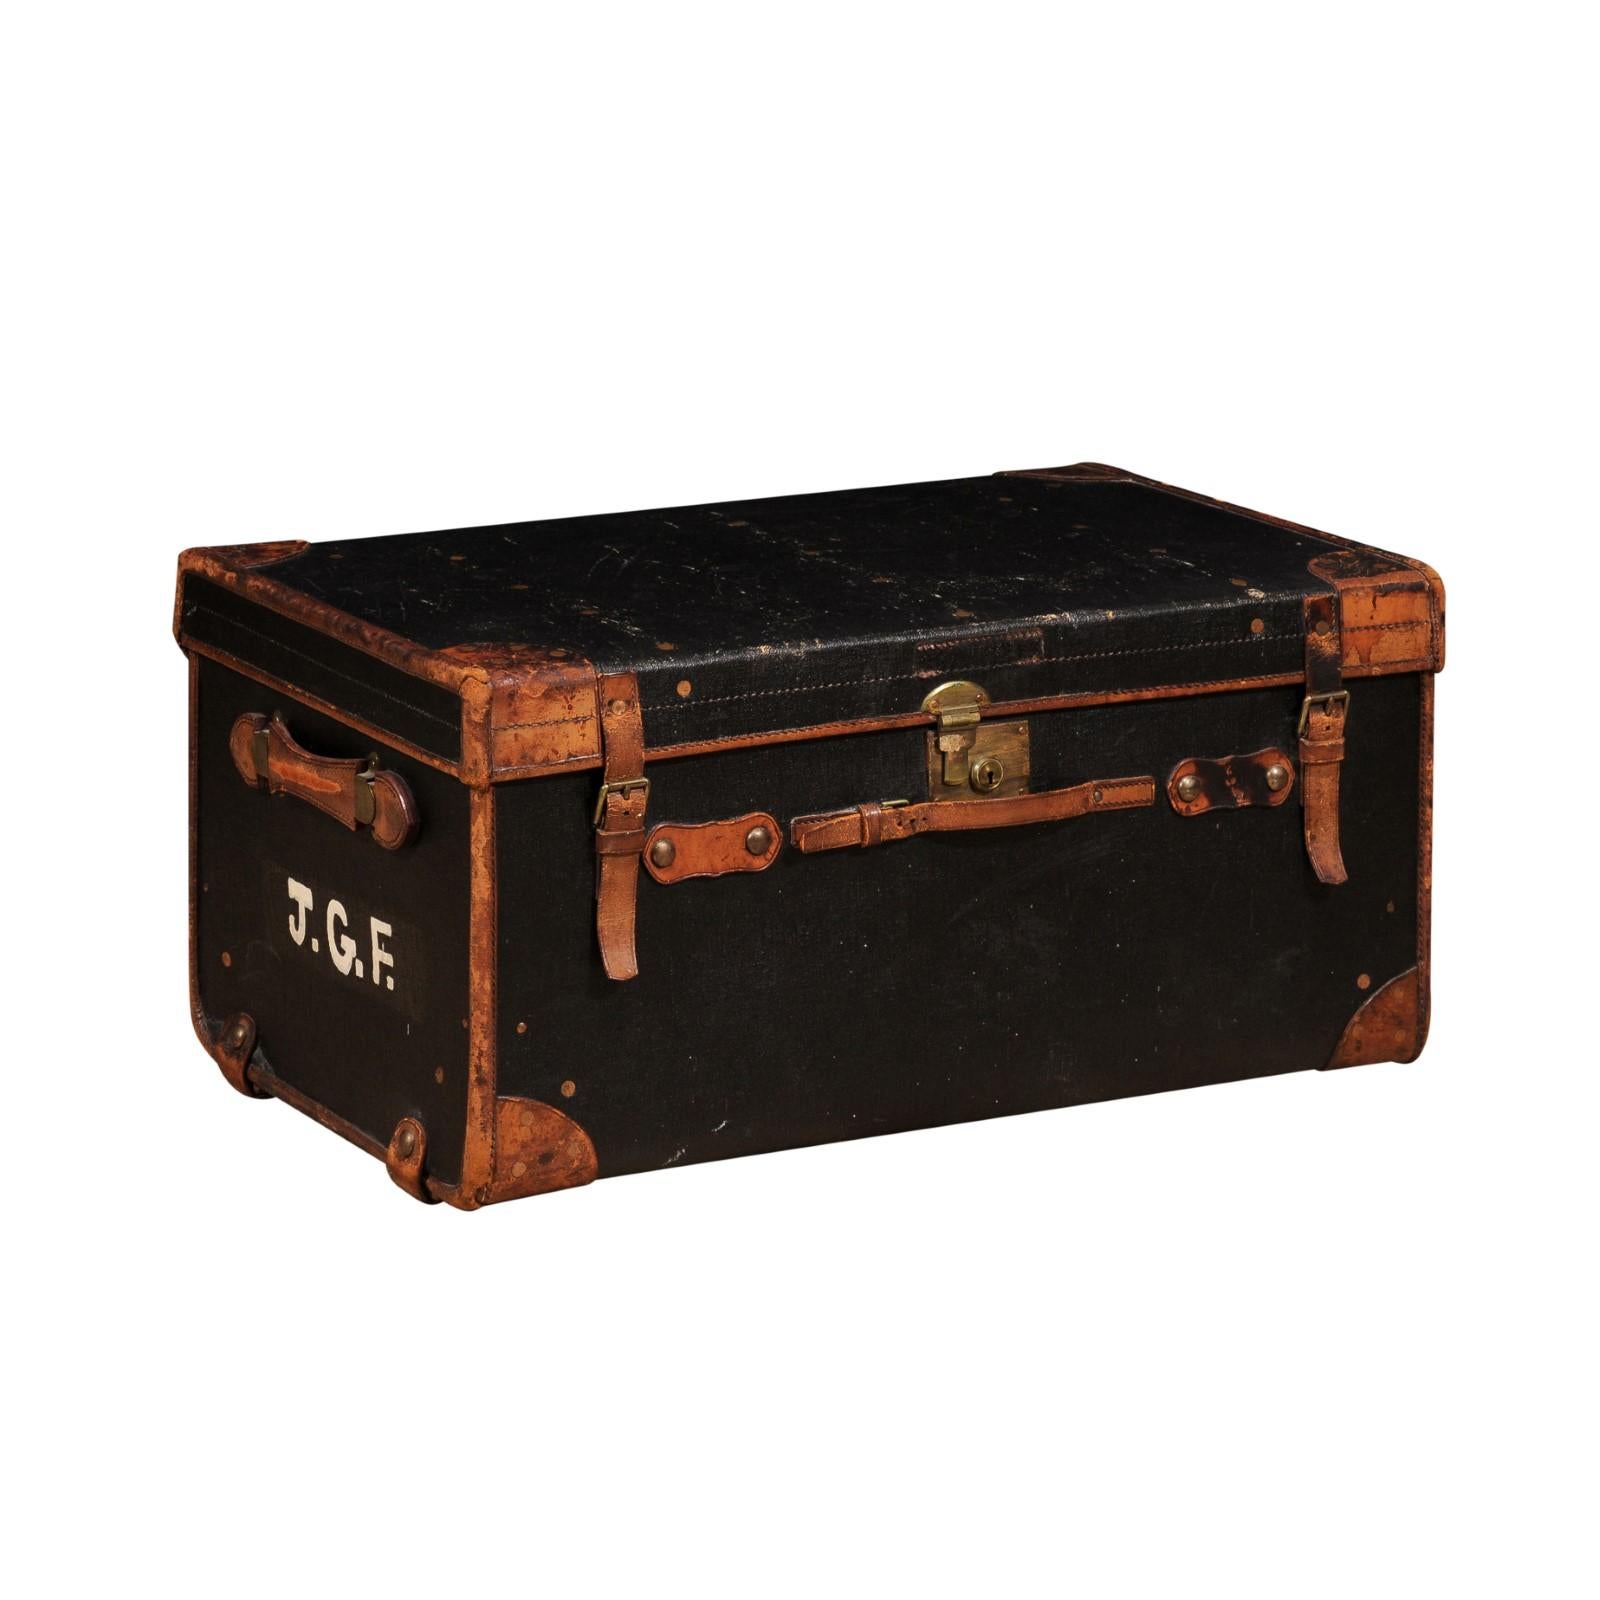 An English Victorian period black and brown traveling trunk from the 19th century with J.G.F initials painted on the side and removable trays on the inside. Presenting a stunning English Victorian period traveling trunk, dating back to the 19th